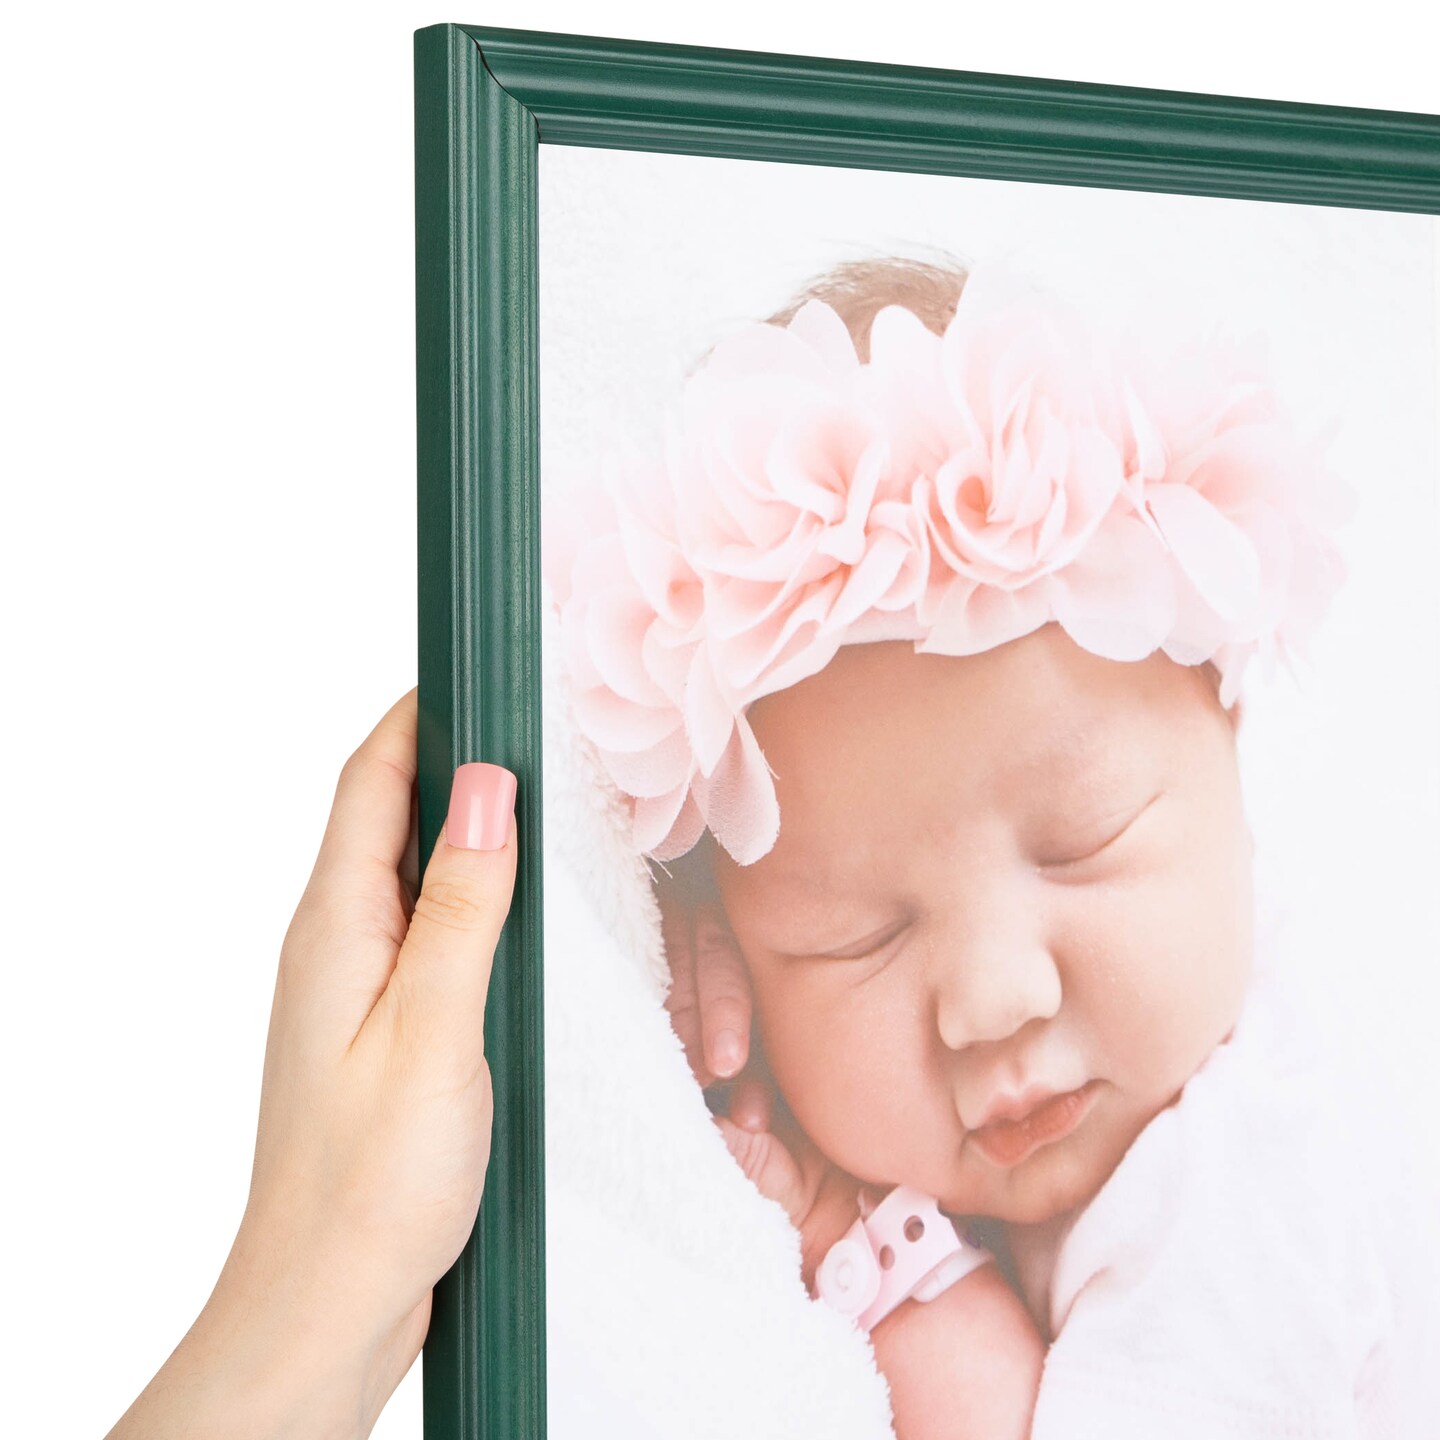 Arttoframes 20x20 Inch Picture Frame This 1 Inch Custom Wood Poster